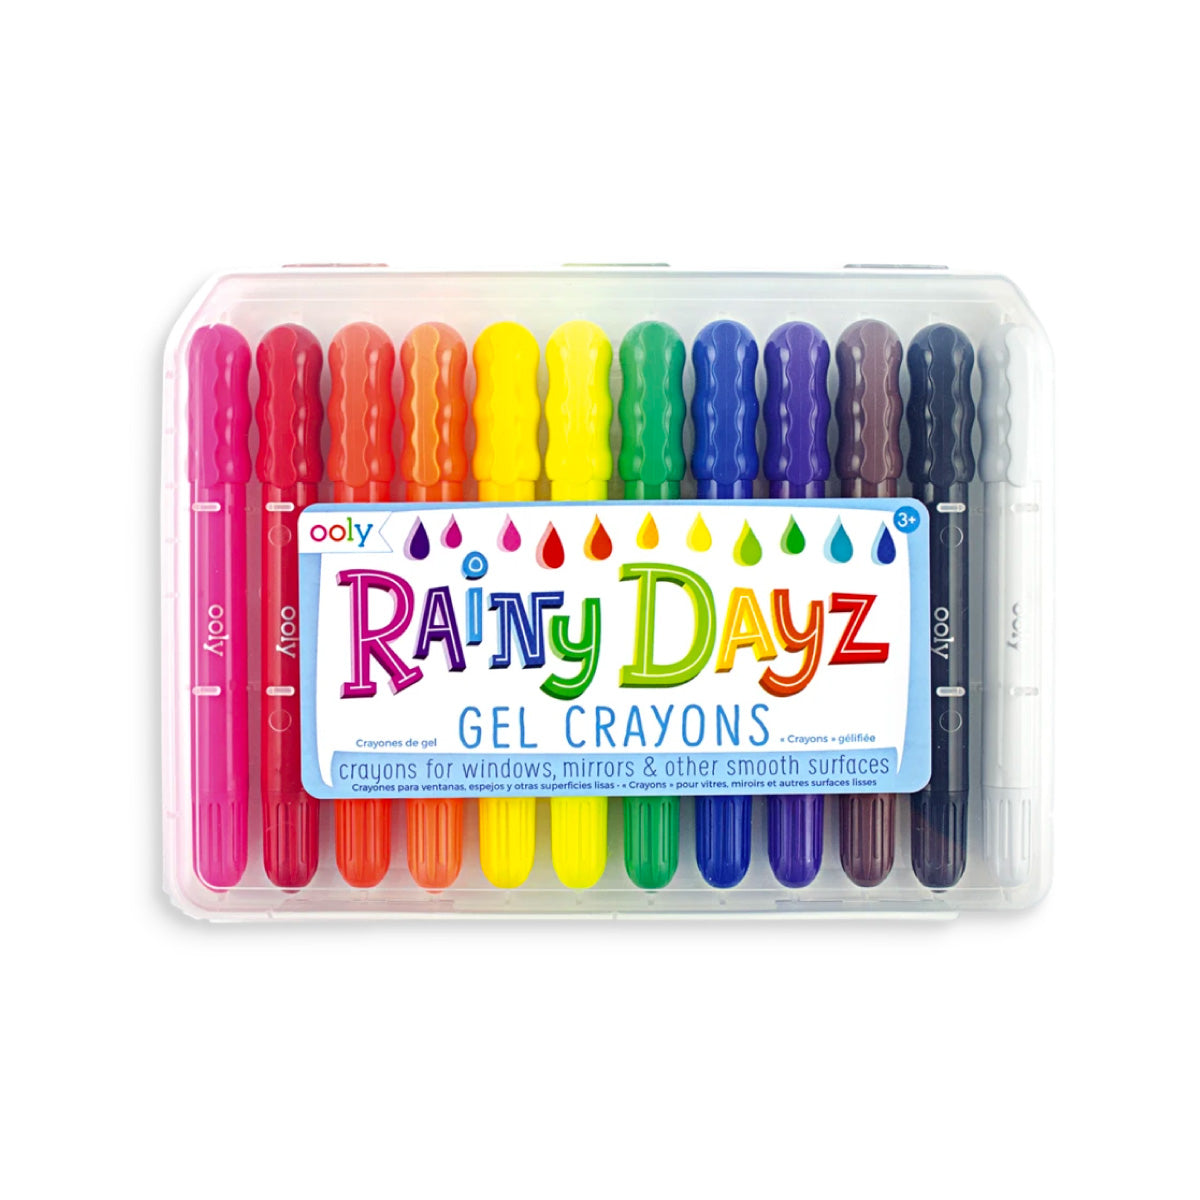 Rainy Dayz Gel Crayons from Ooly